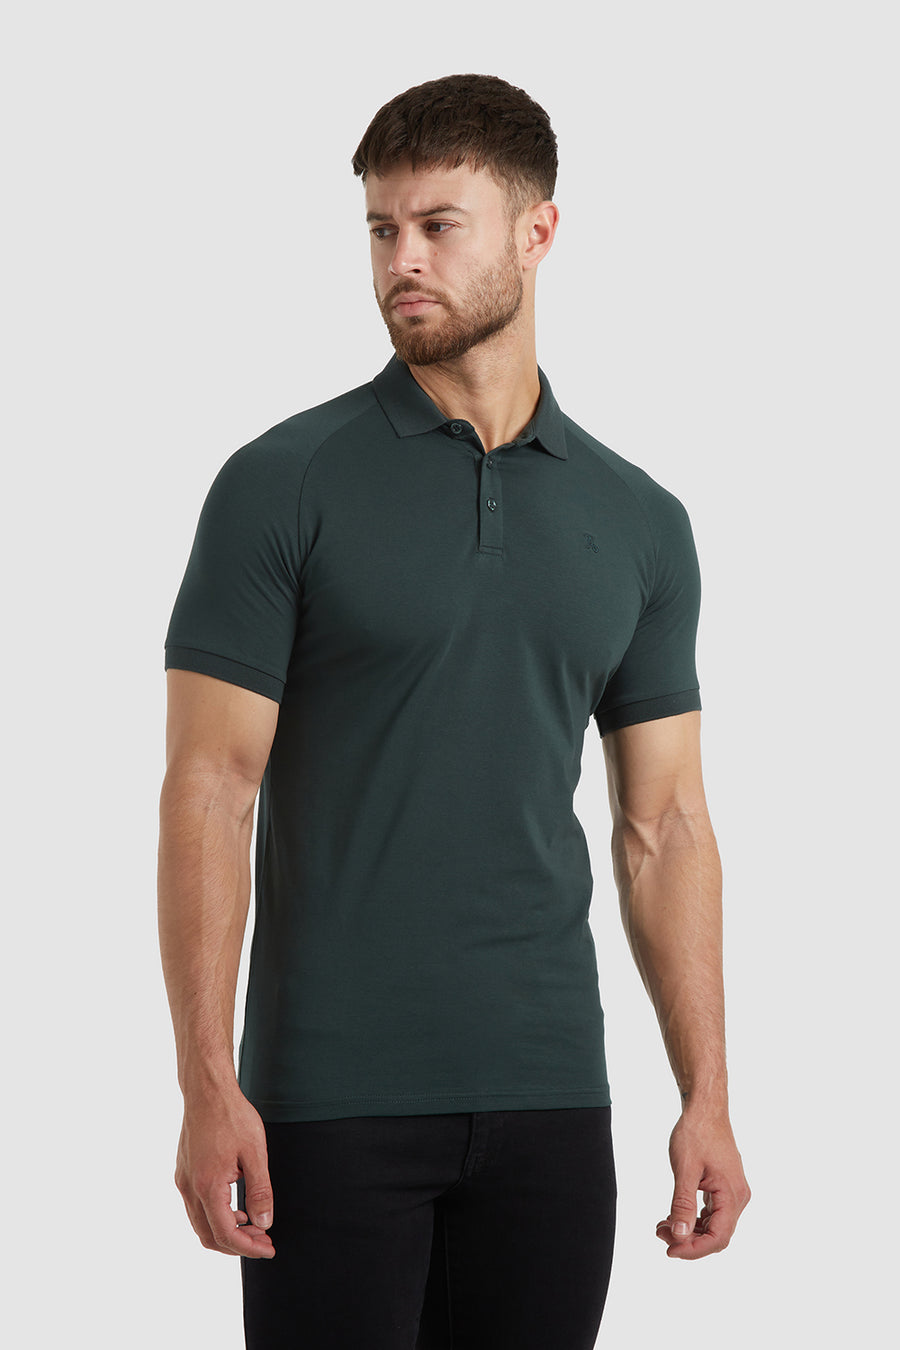 Athletic Fit Polo Shirt in Pine - TAILORED ATHLETE - USA